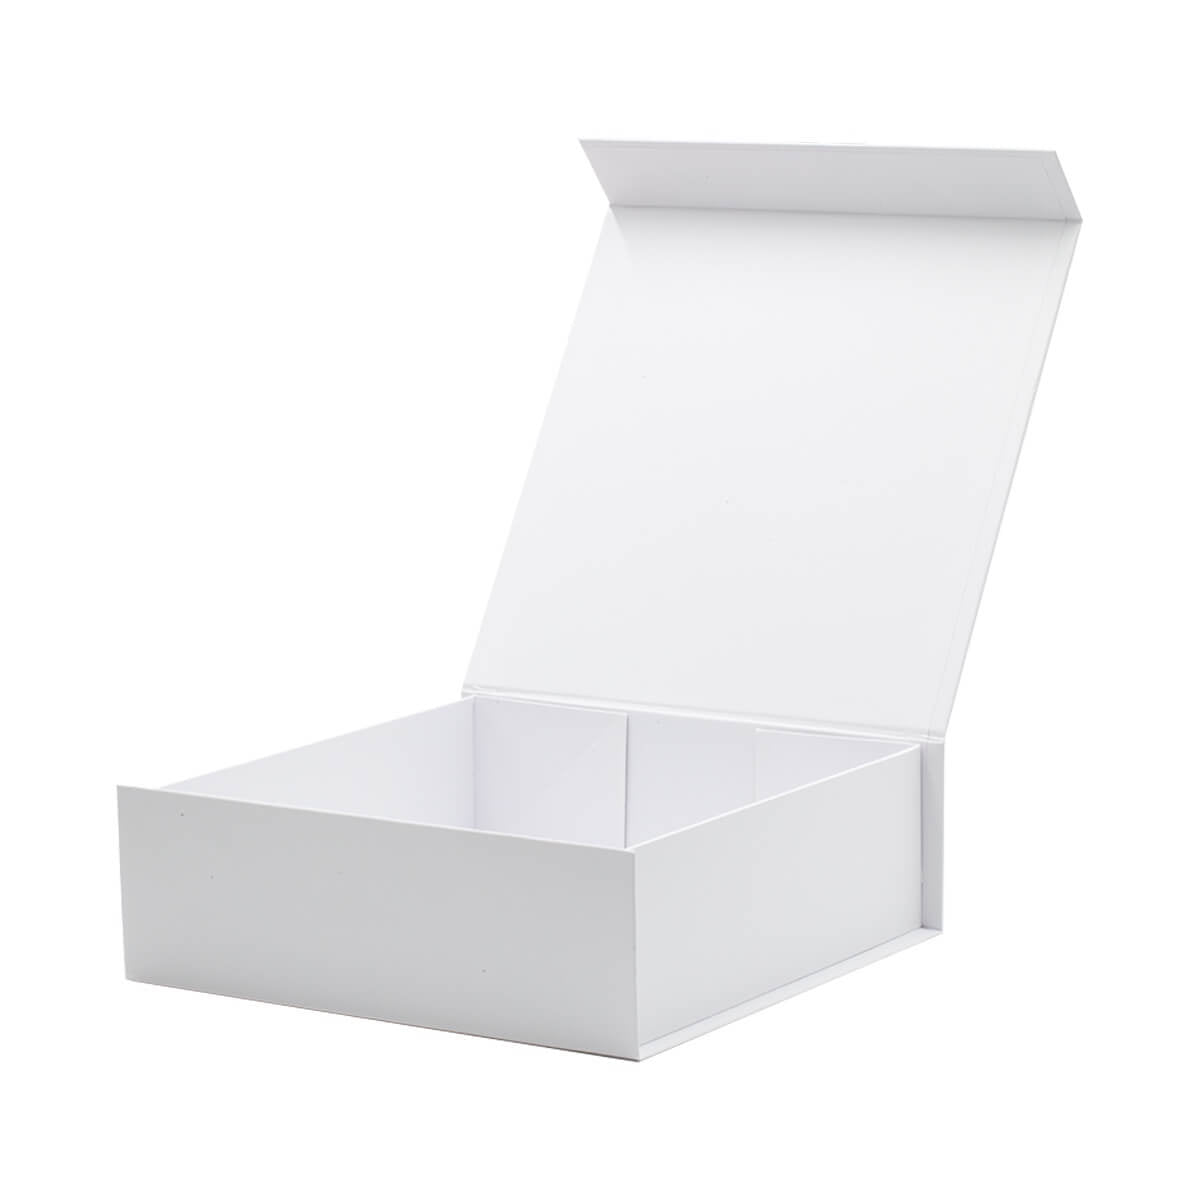 Gift Boxes & Tins Small Square White Magnetic Gift Box with Ribbon - Cherish & co.